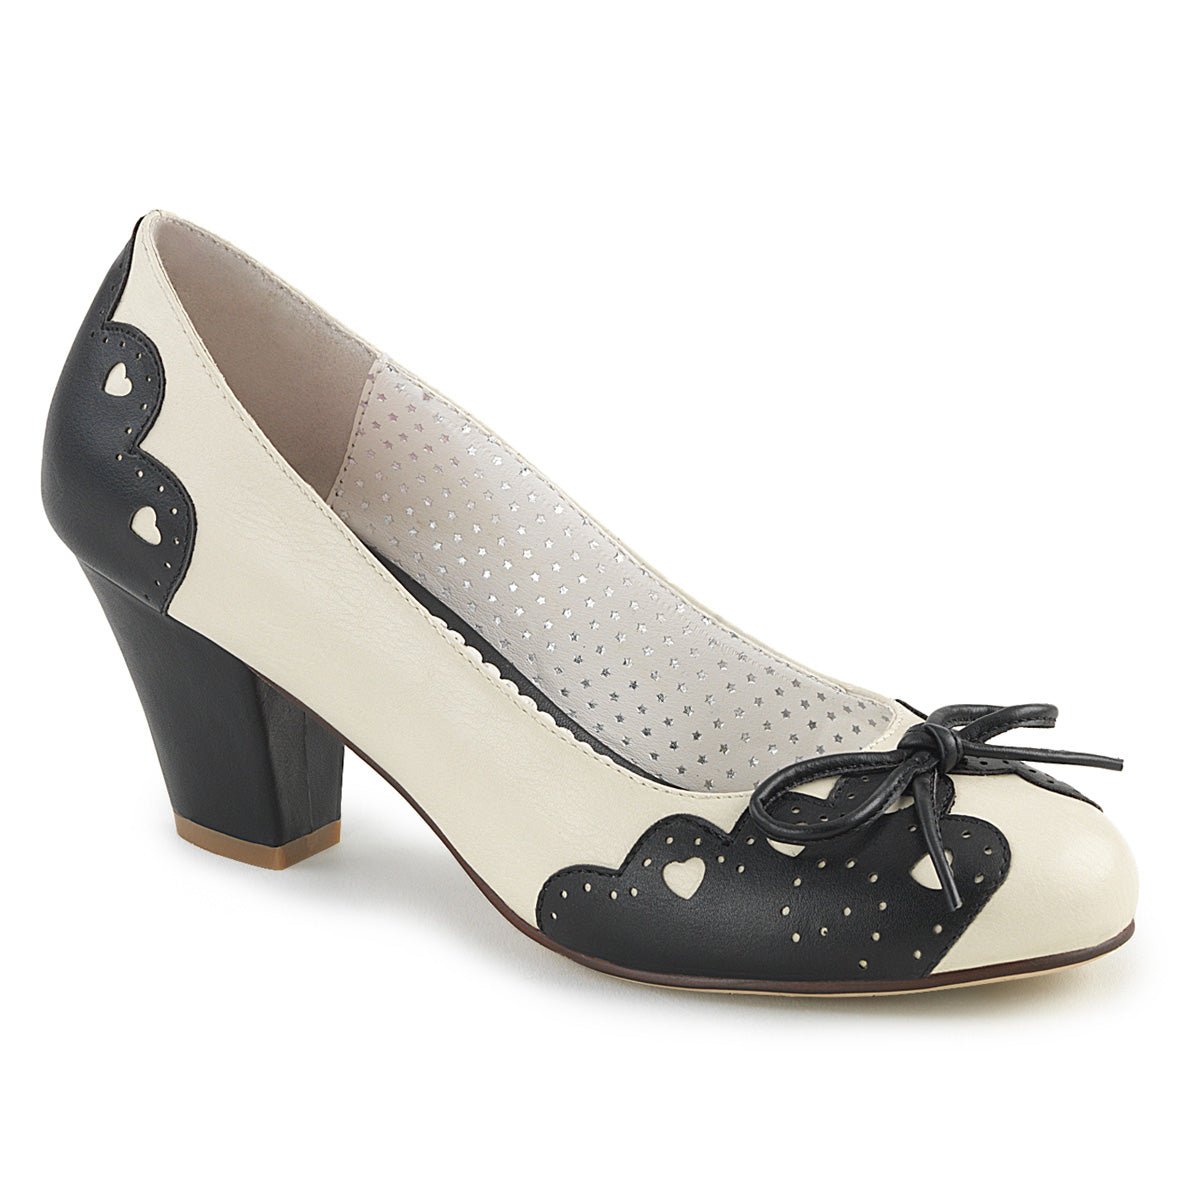 Clearance Pin-Up Wiggle 17 Cream/Black Size 5UK/8USA - From Clearance Sold By Alternative Footwear